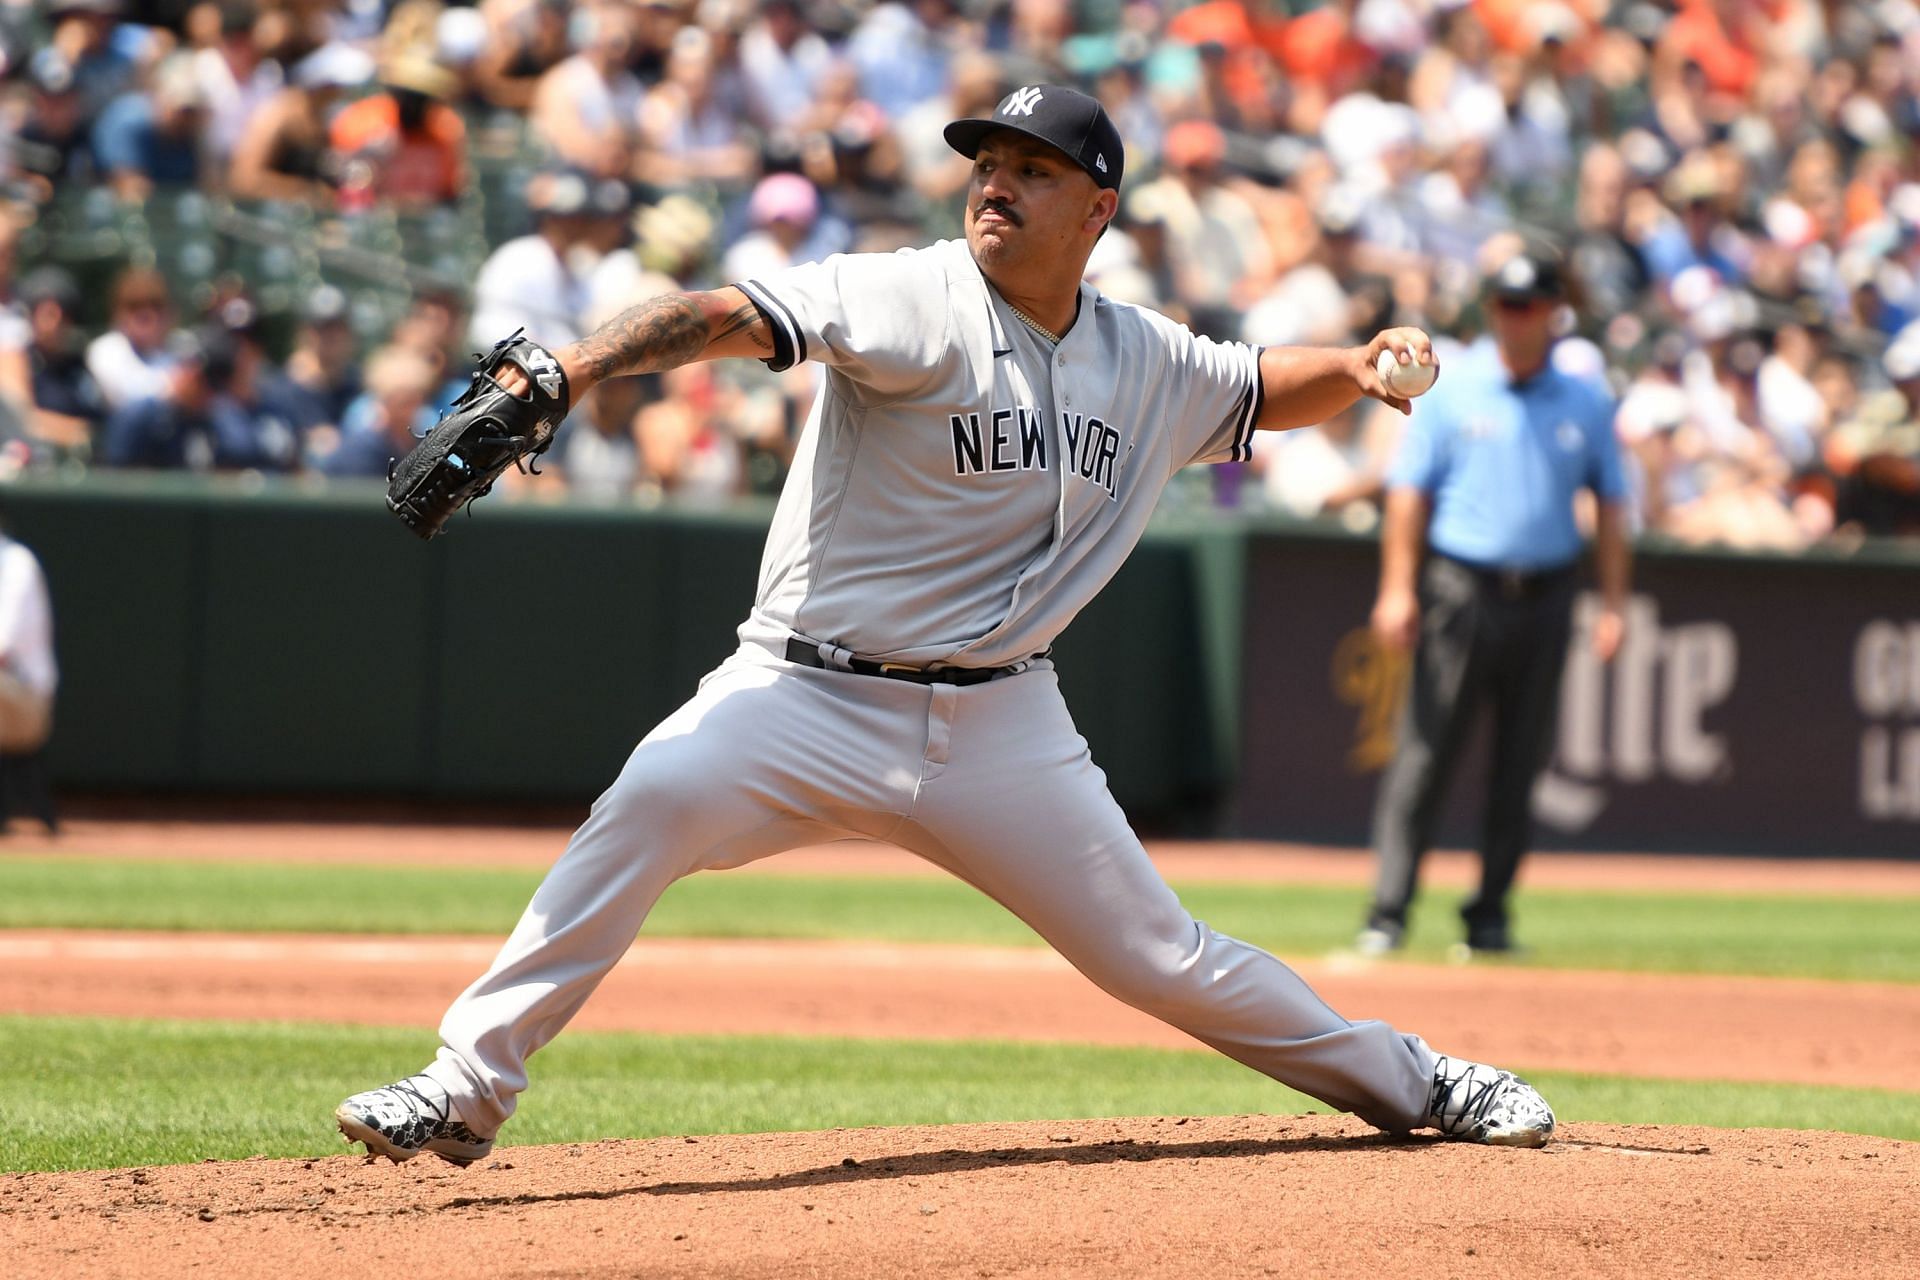 Cortes has been having a standout season with the Yankees this time around in the AL East